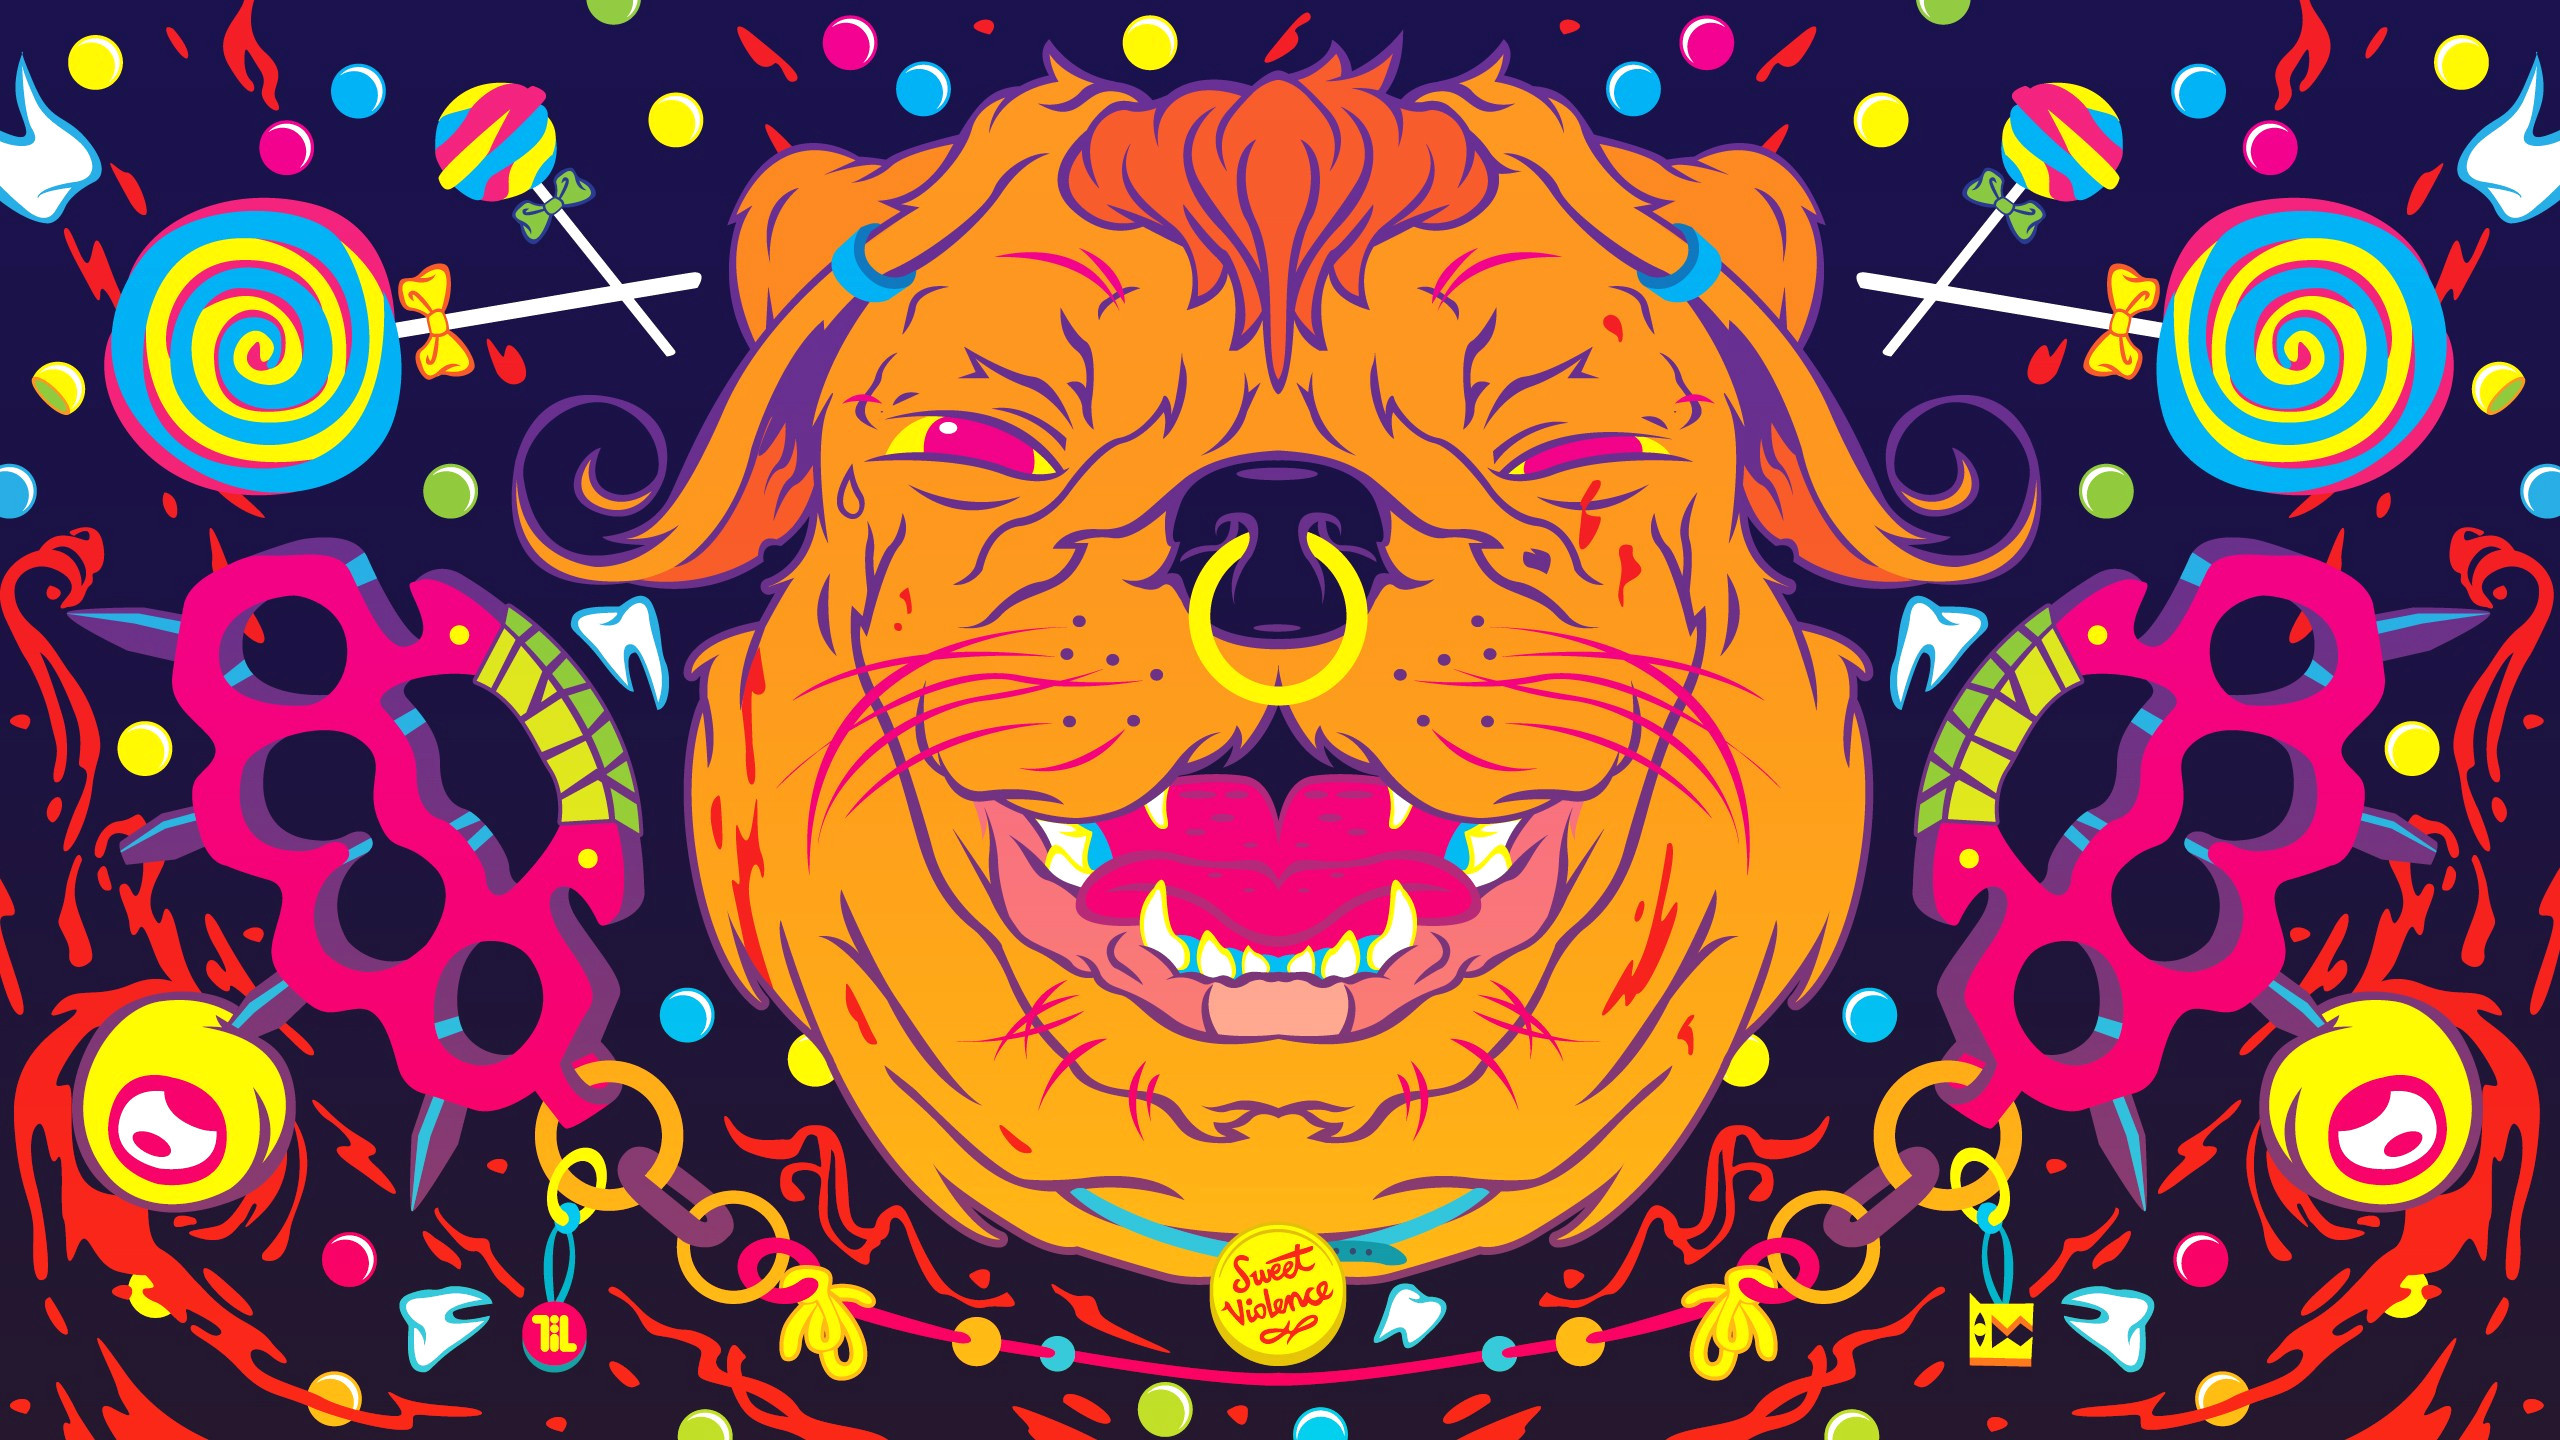 2560x1440 ... Awesome Psychedelic Wall Art Of [ 200 Latest ] Trippy Wallpapers &  Psychedelic